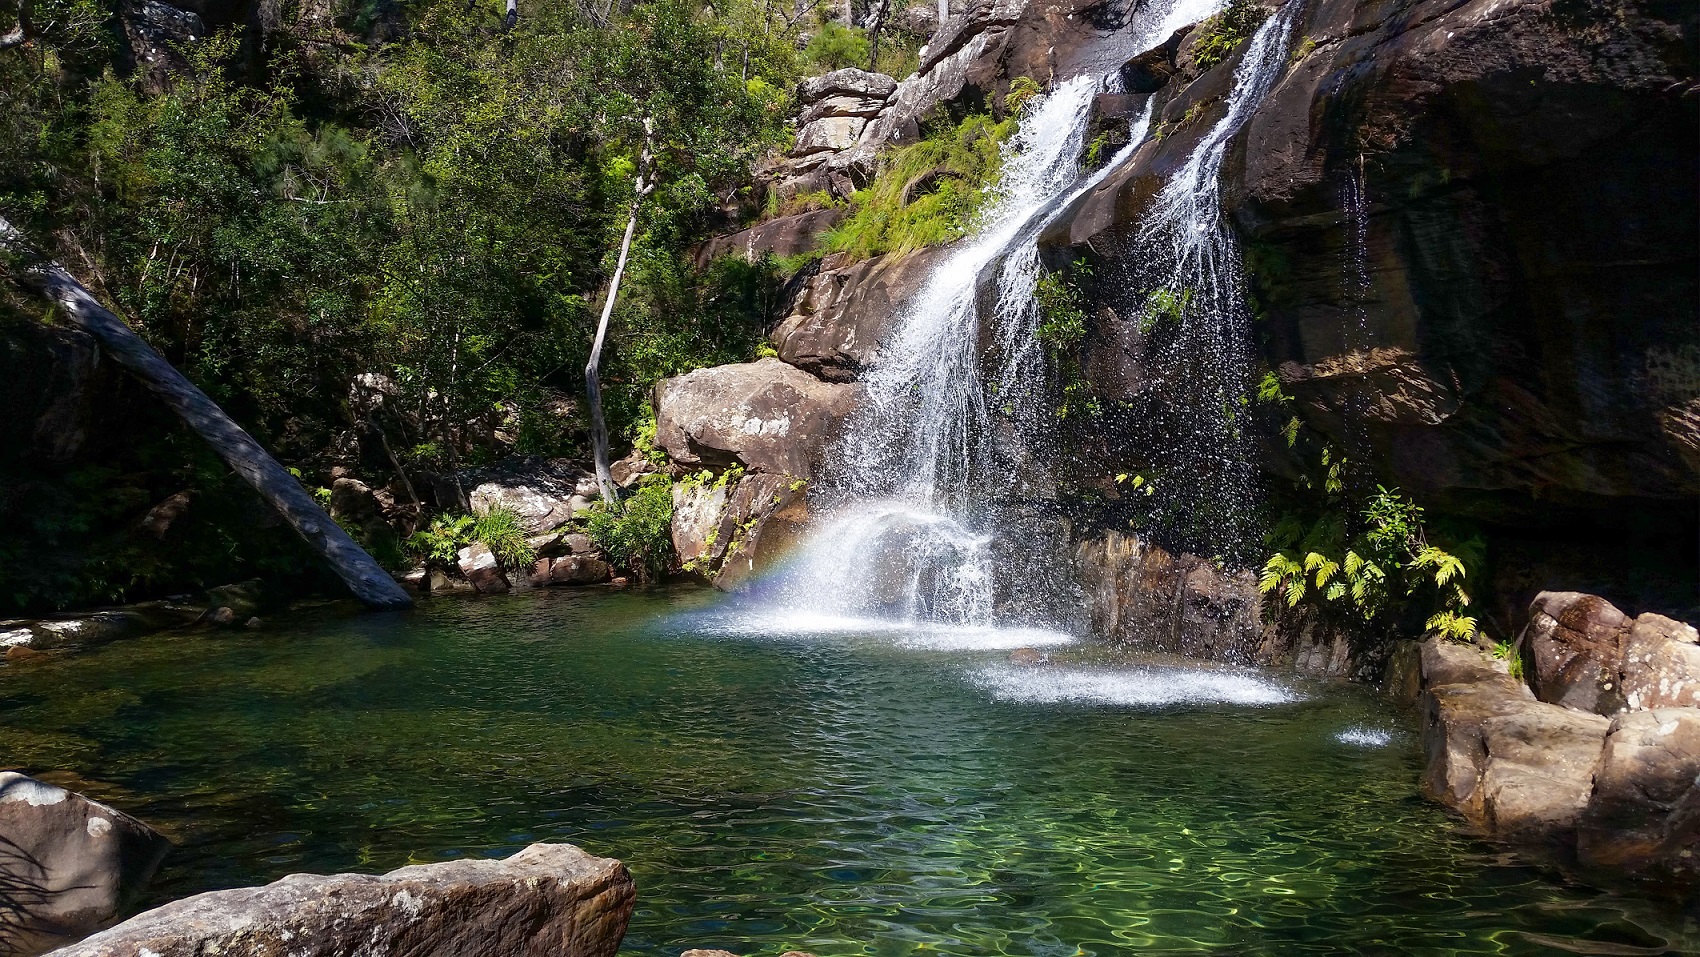 Take A Walk To Discover Scout Falls And The Waterhole Below